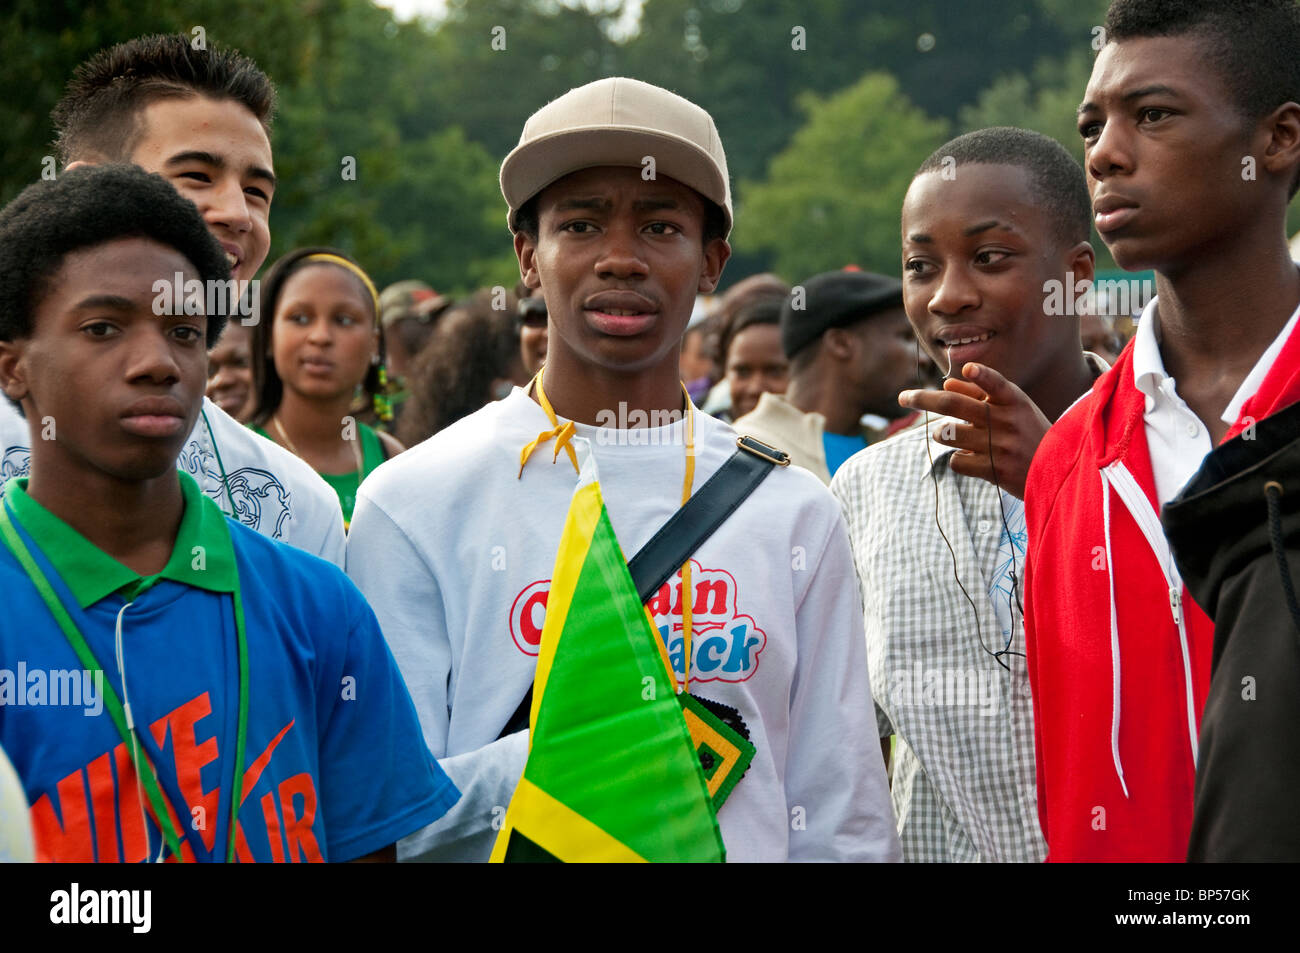 group of jamaican people